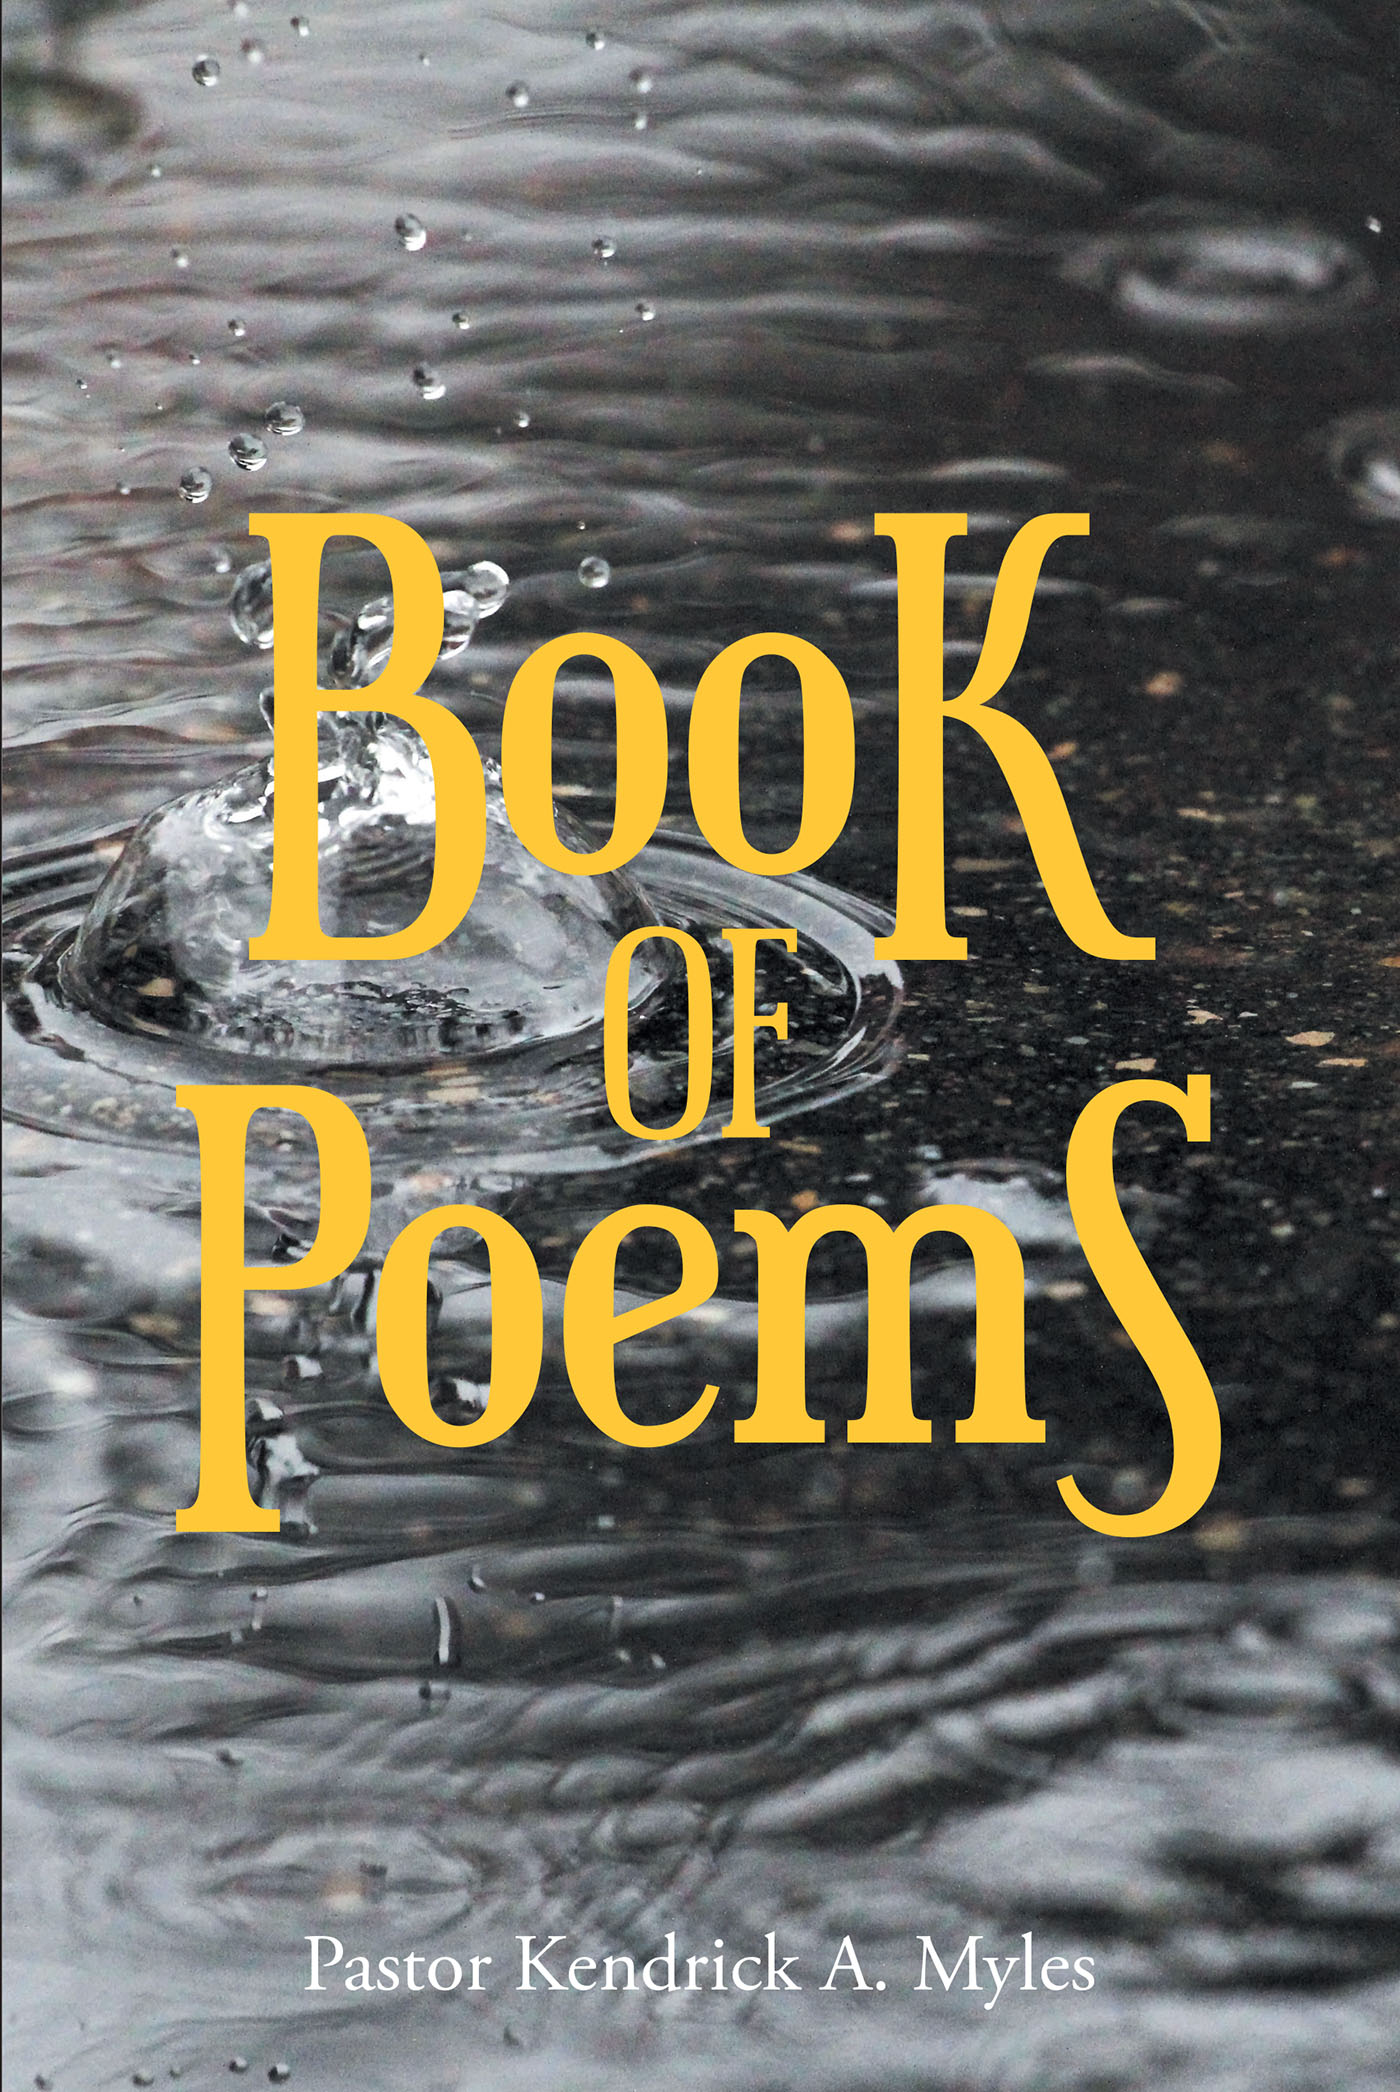 Pastor Kendrick A. Myles’s Newly Released "Book of Poems" is an Engaging Collection of Spiritually-Charged Poetic Works